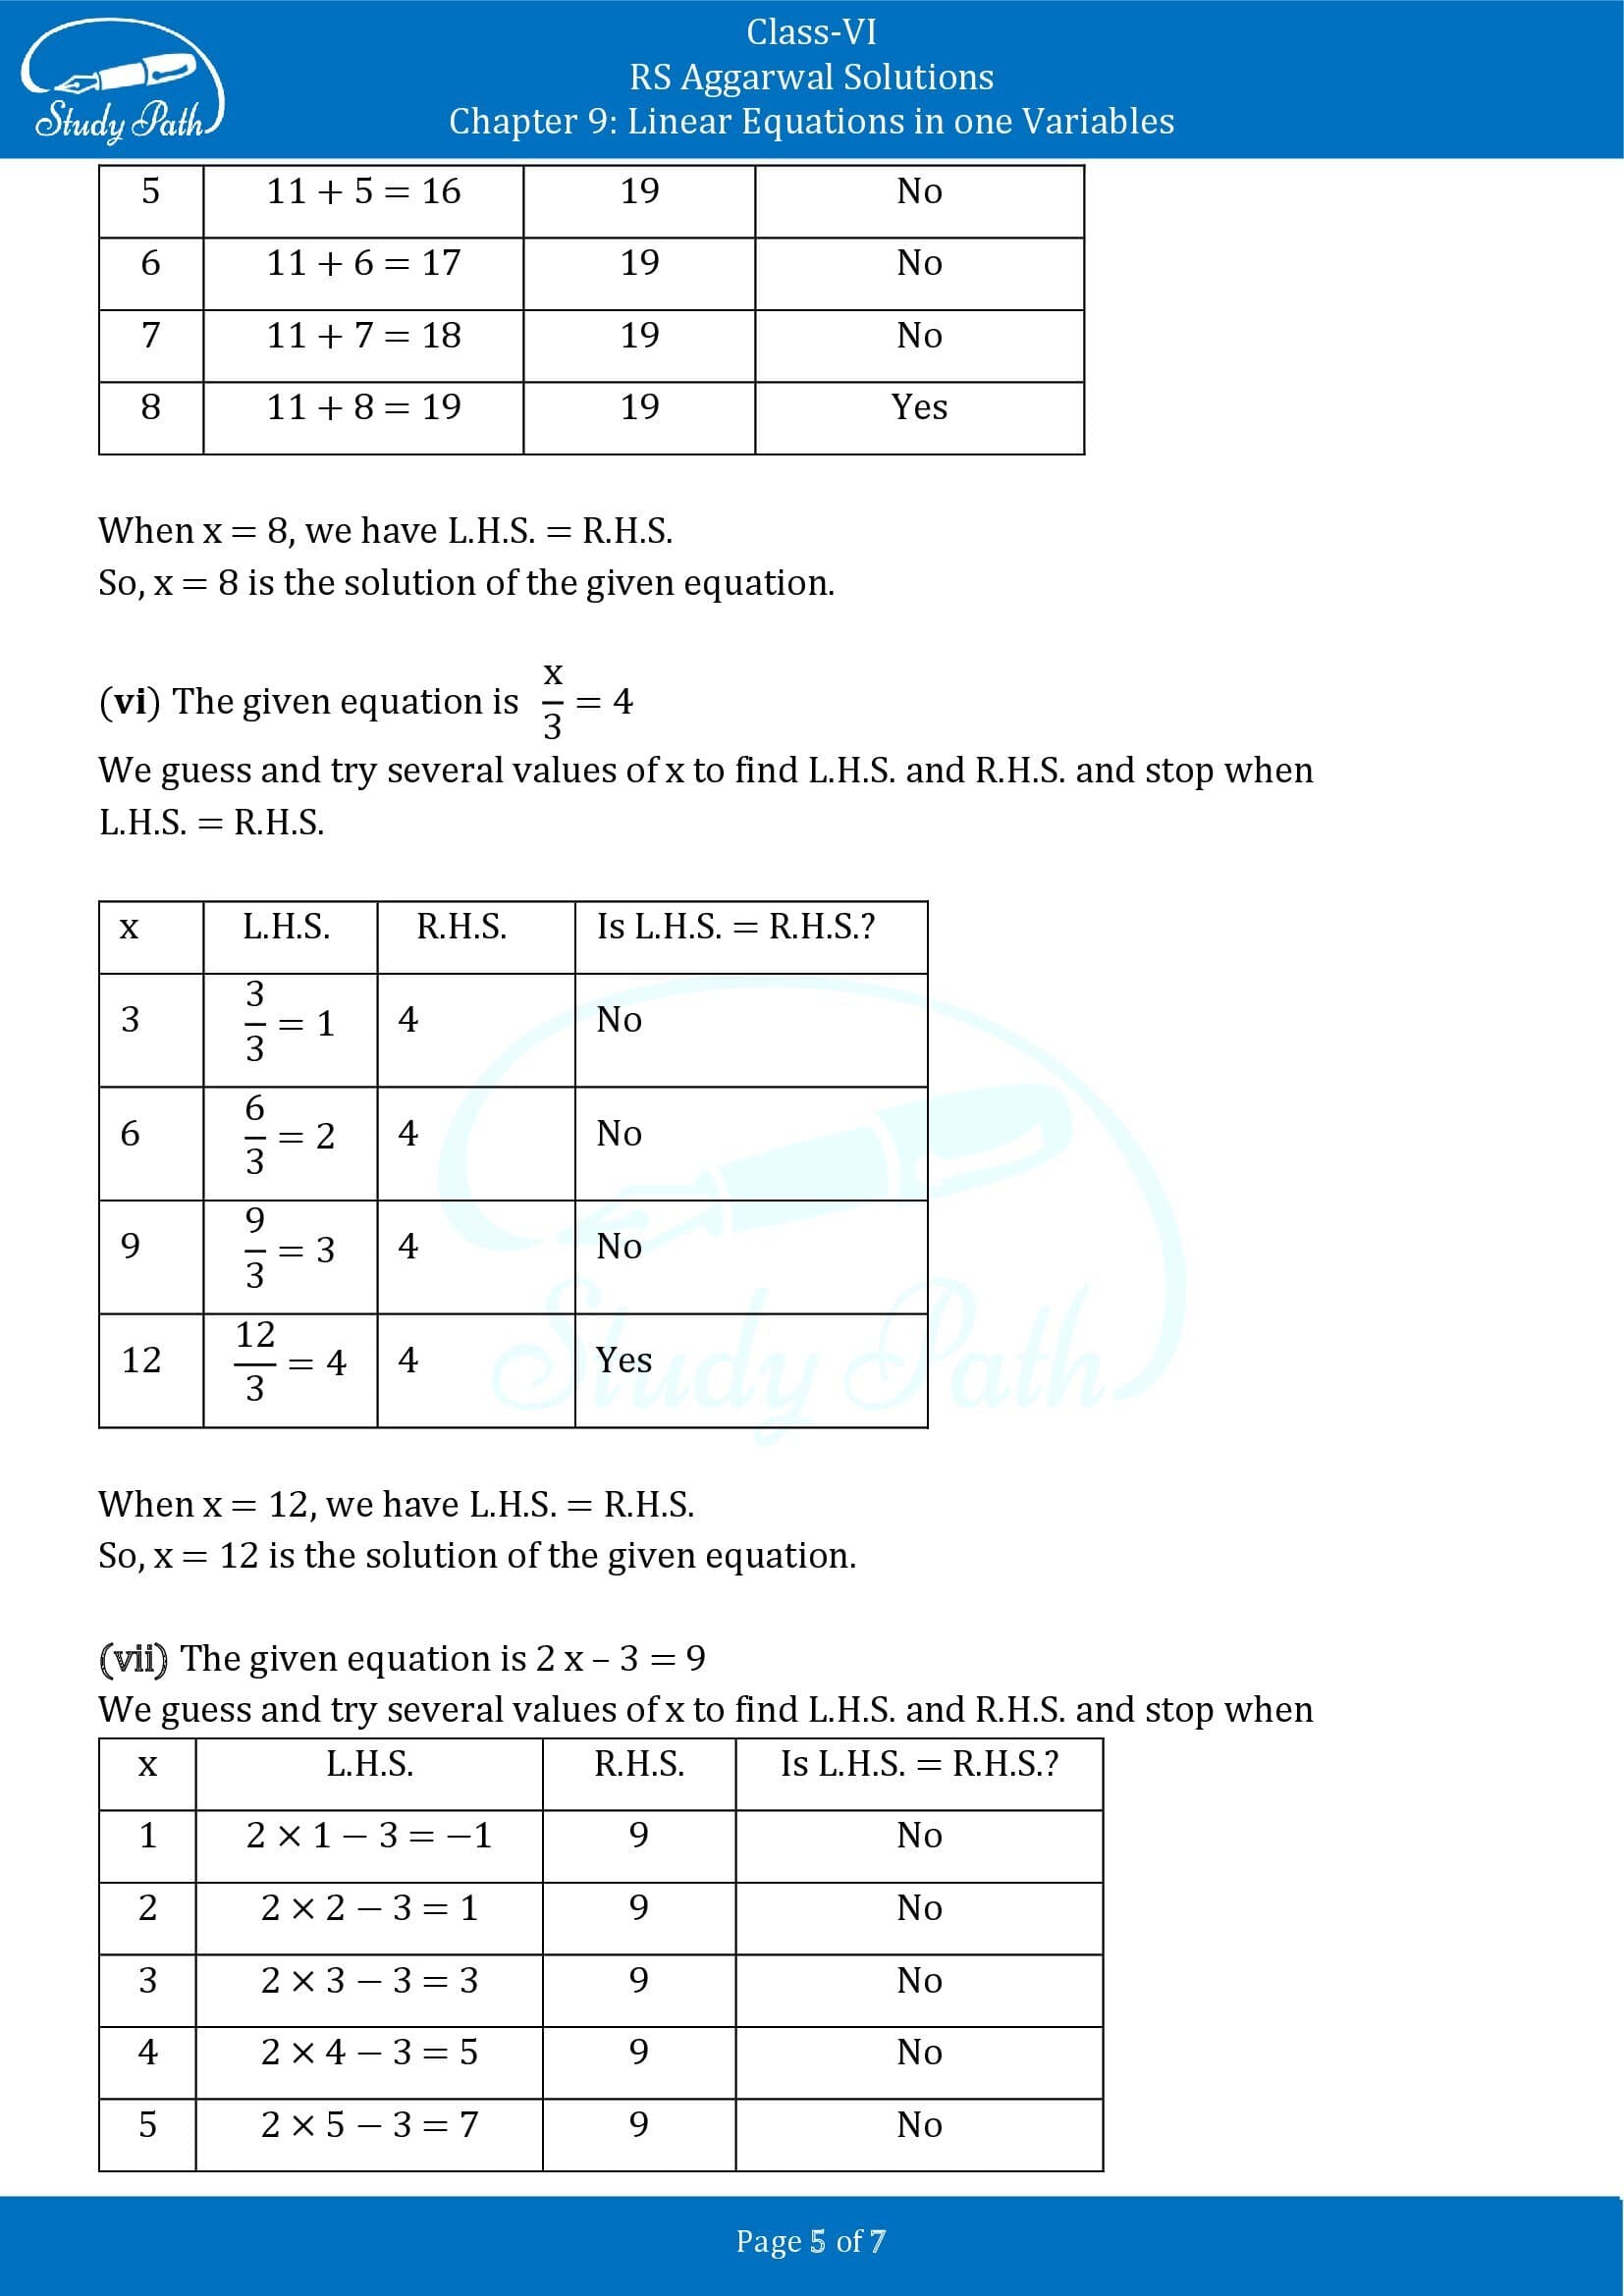 RS Aggarwal Solutions Class 6 Chapter 9 Linear Equations in One Variable Exercise 9A 00005